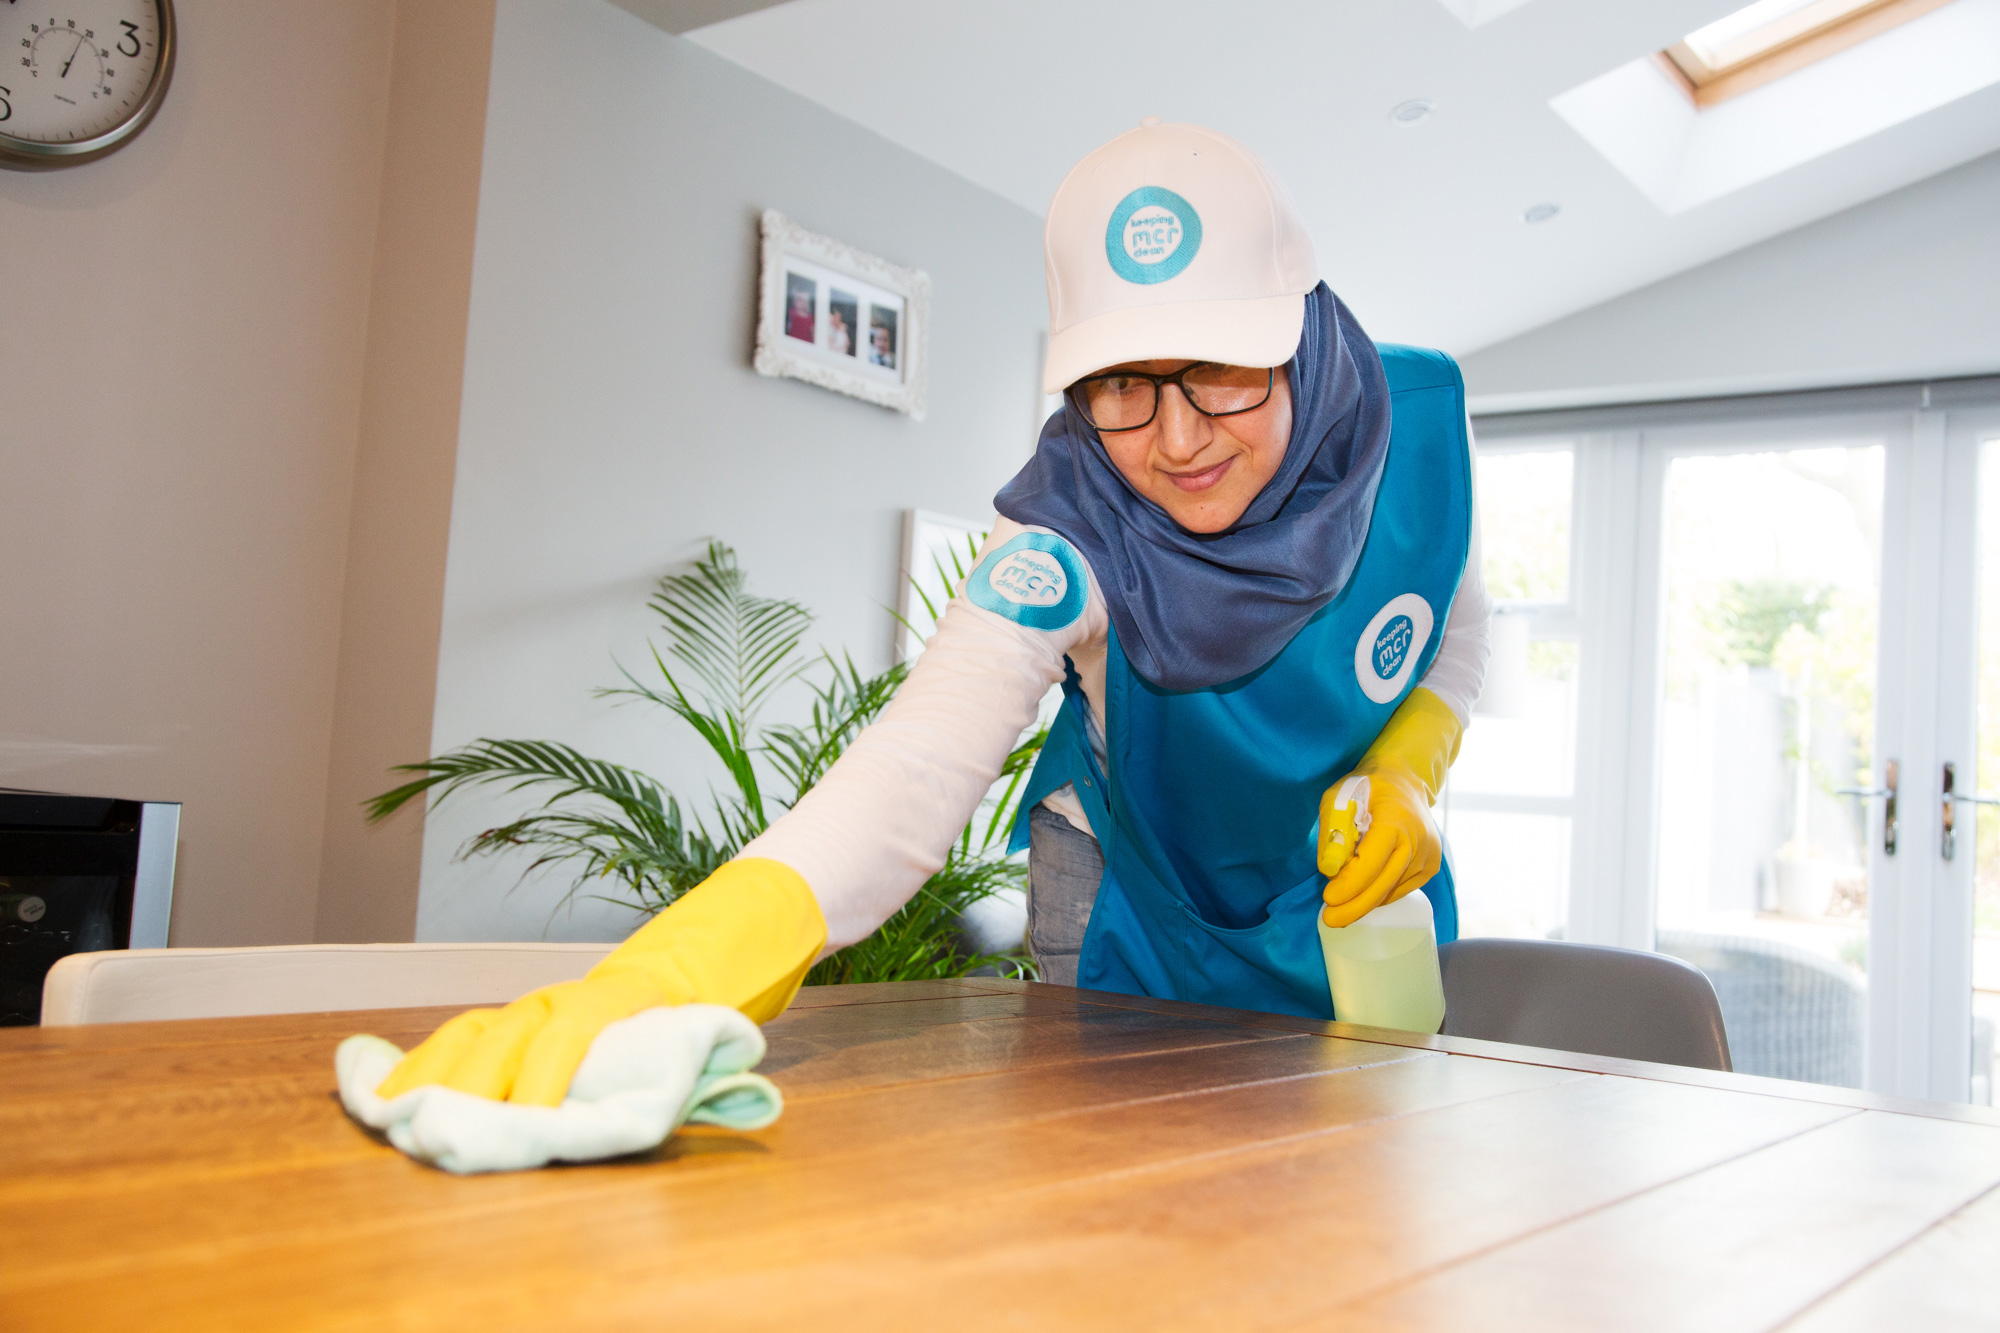 Bringing high quality office cleans to South Manchester